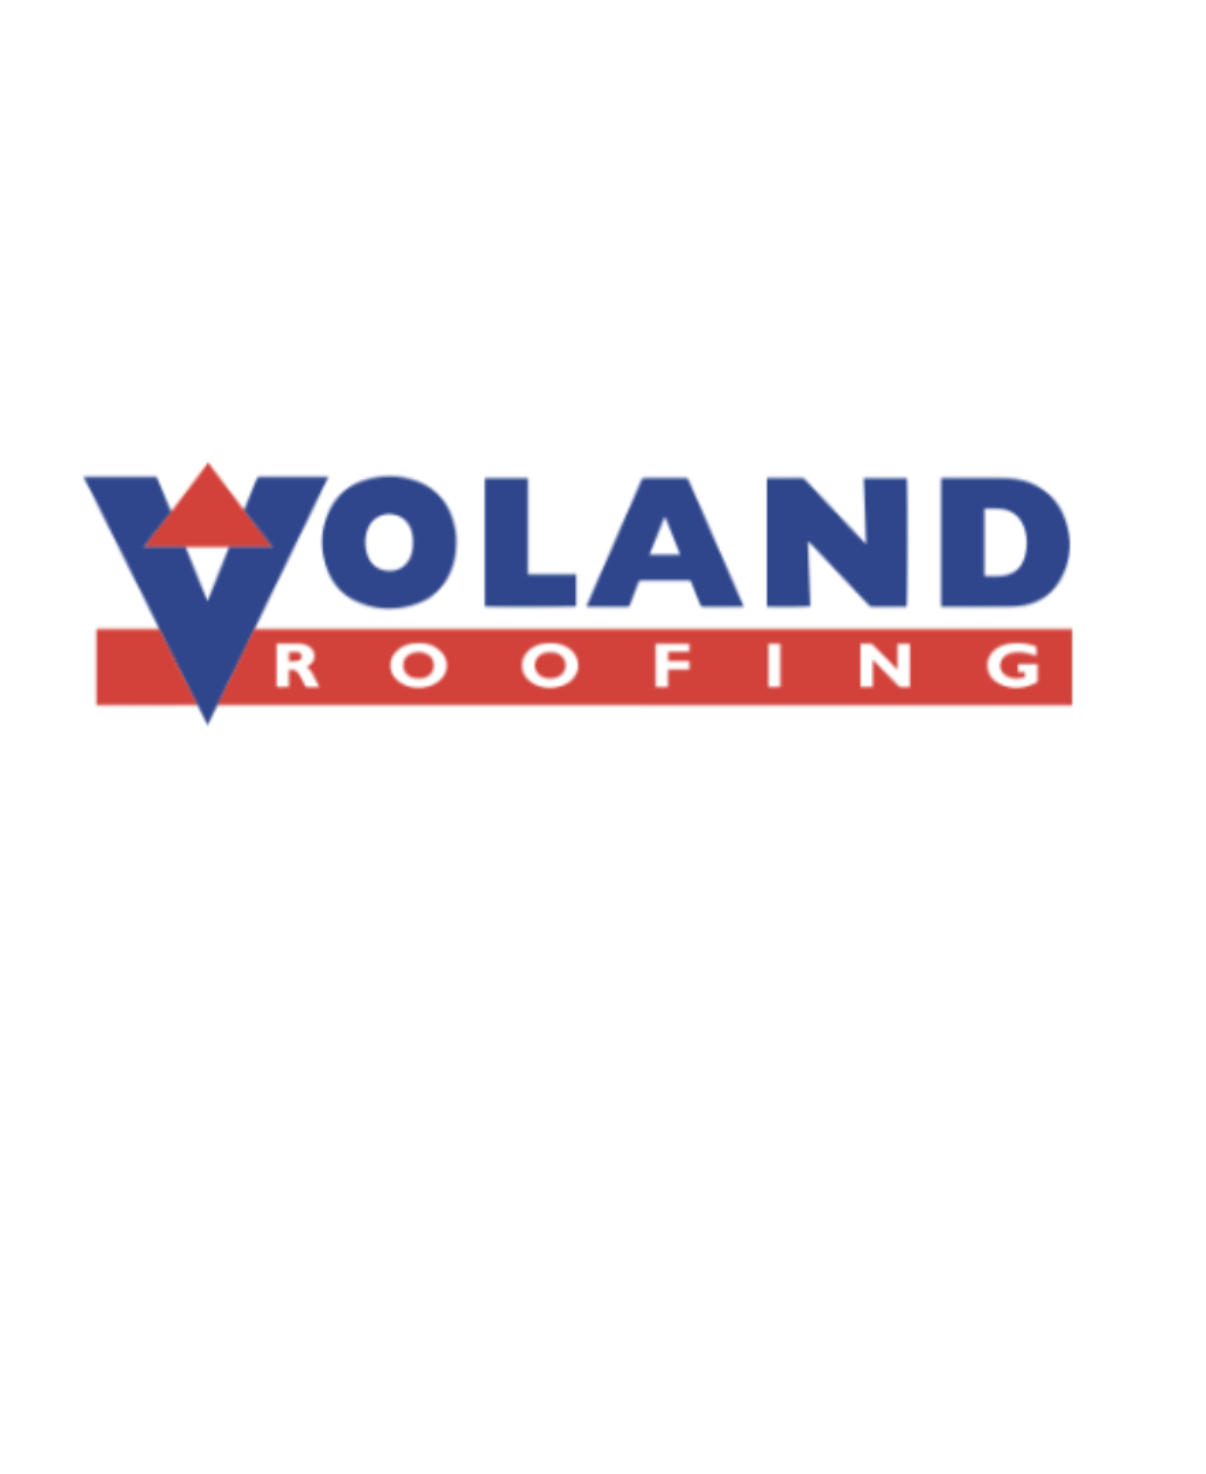 Voland Roofing